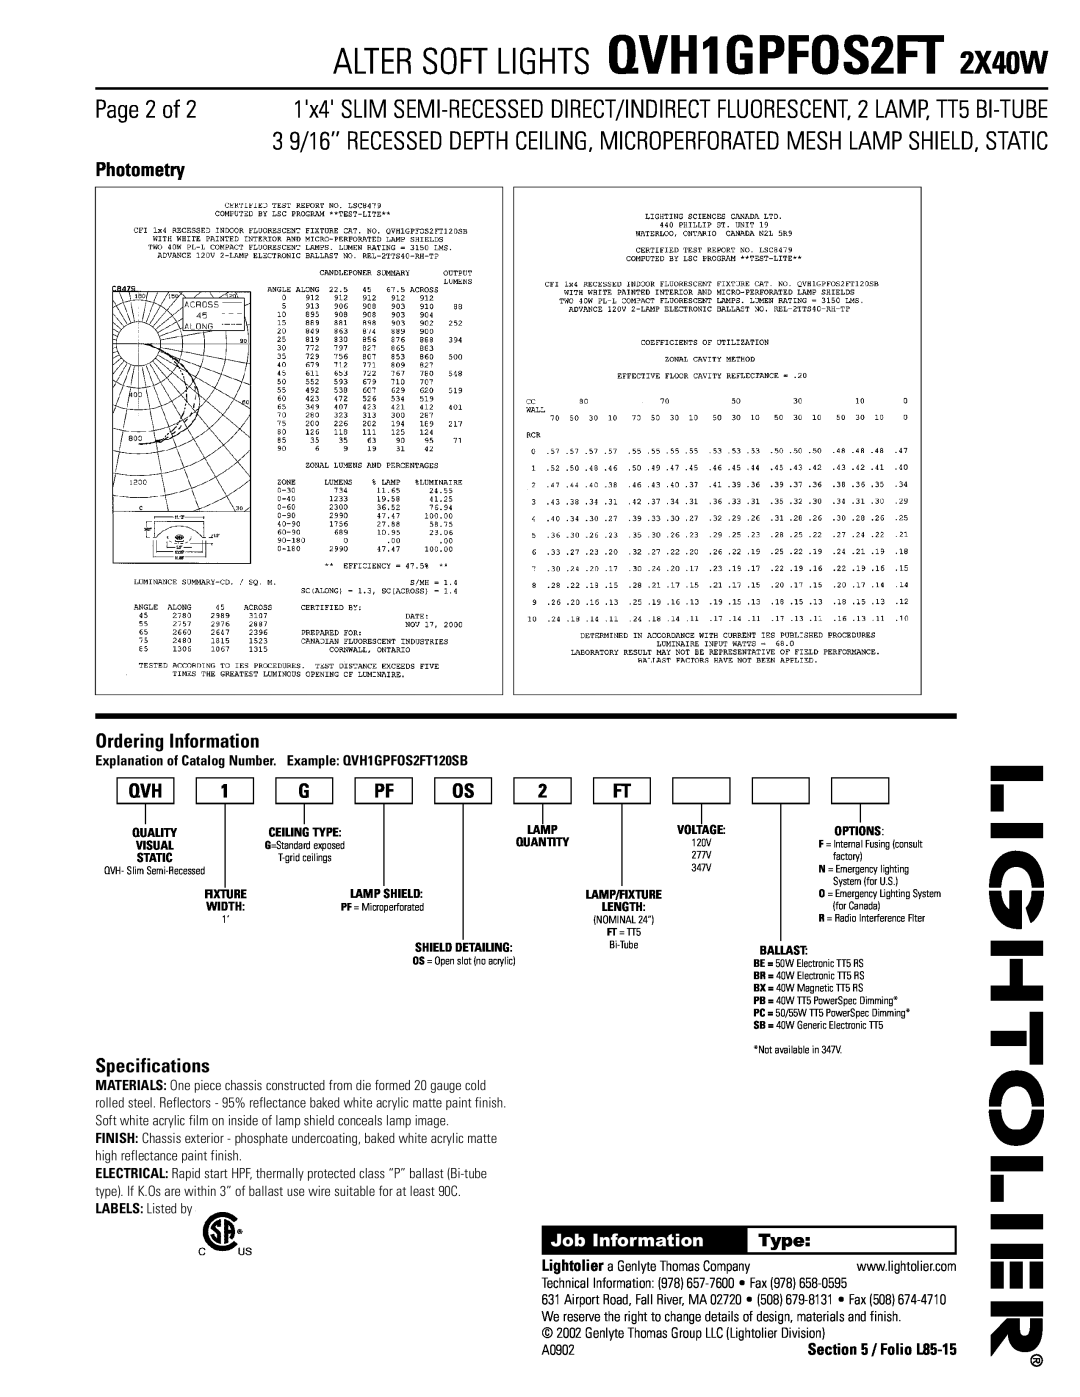 Lightolier dimensions Page 2 of, ALTER SOFT LIGHTS QVH1GPFOS2FT 2X40W, Photometry, Ordering Information, Specifications 